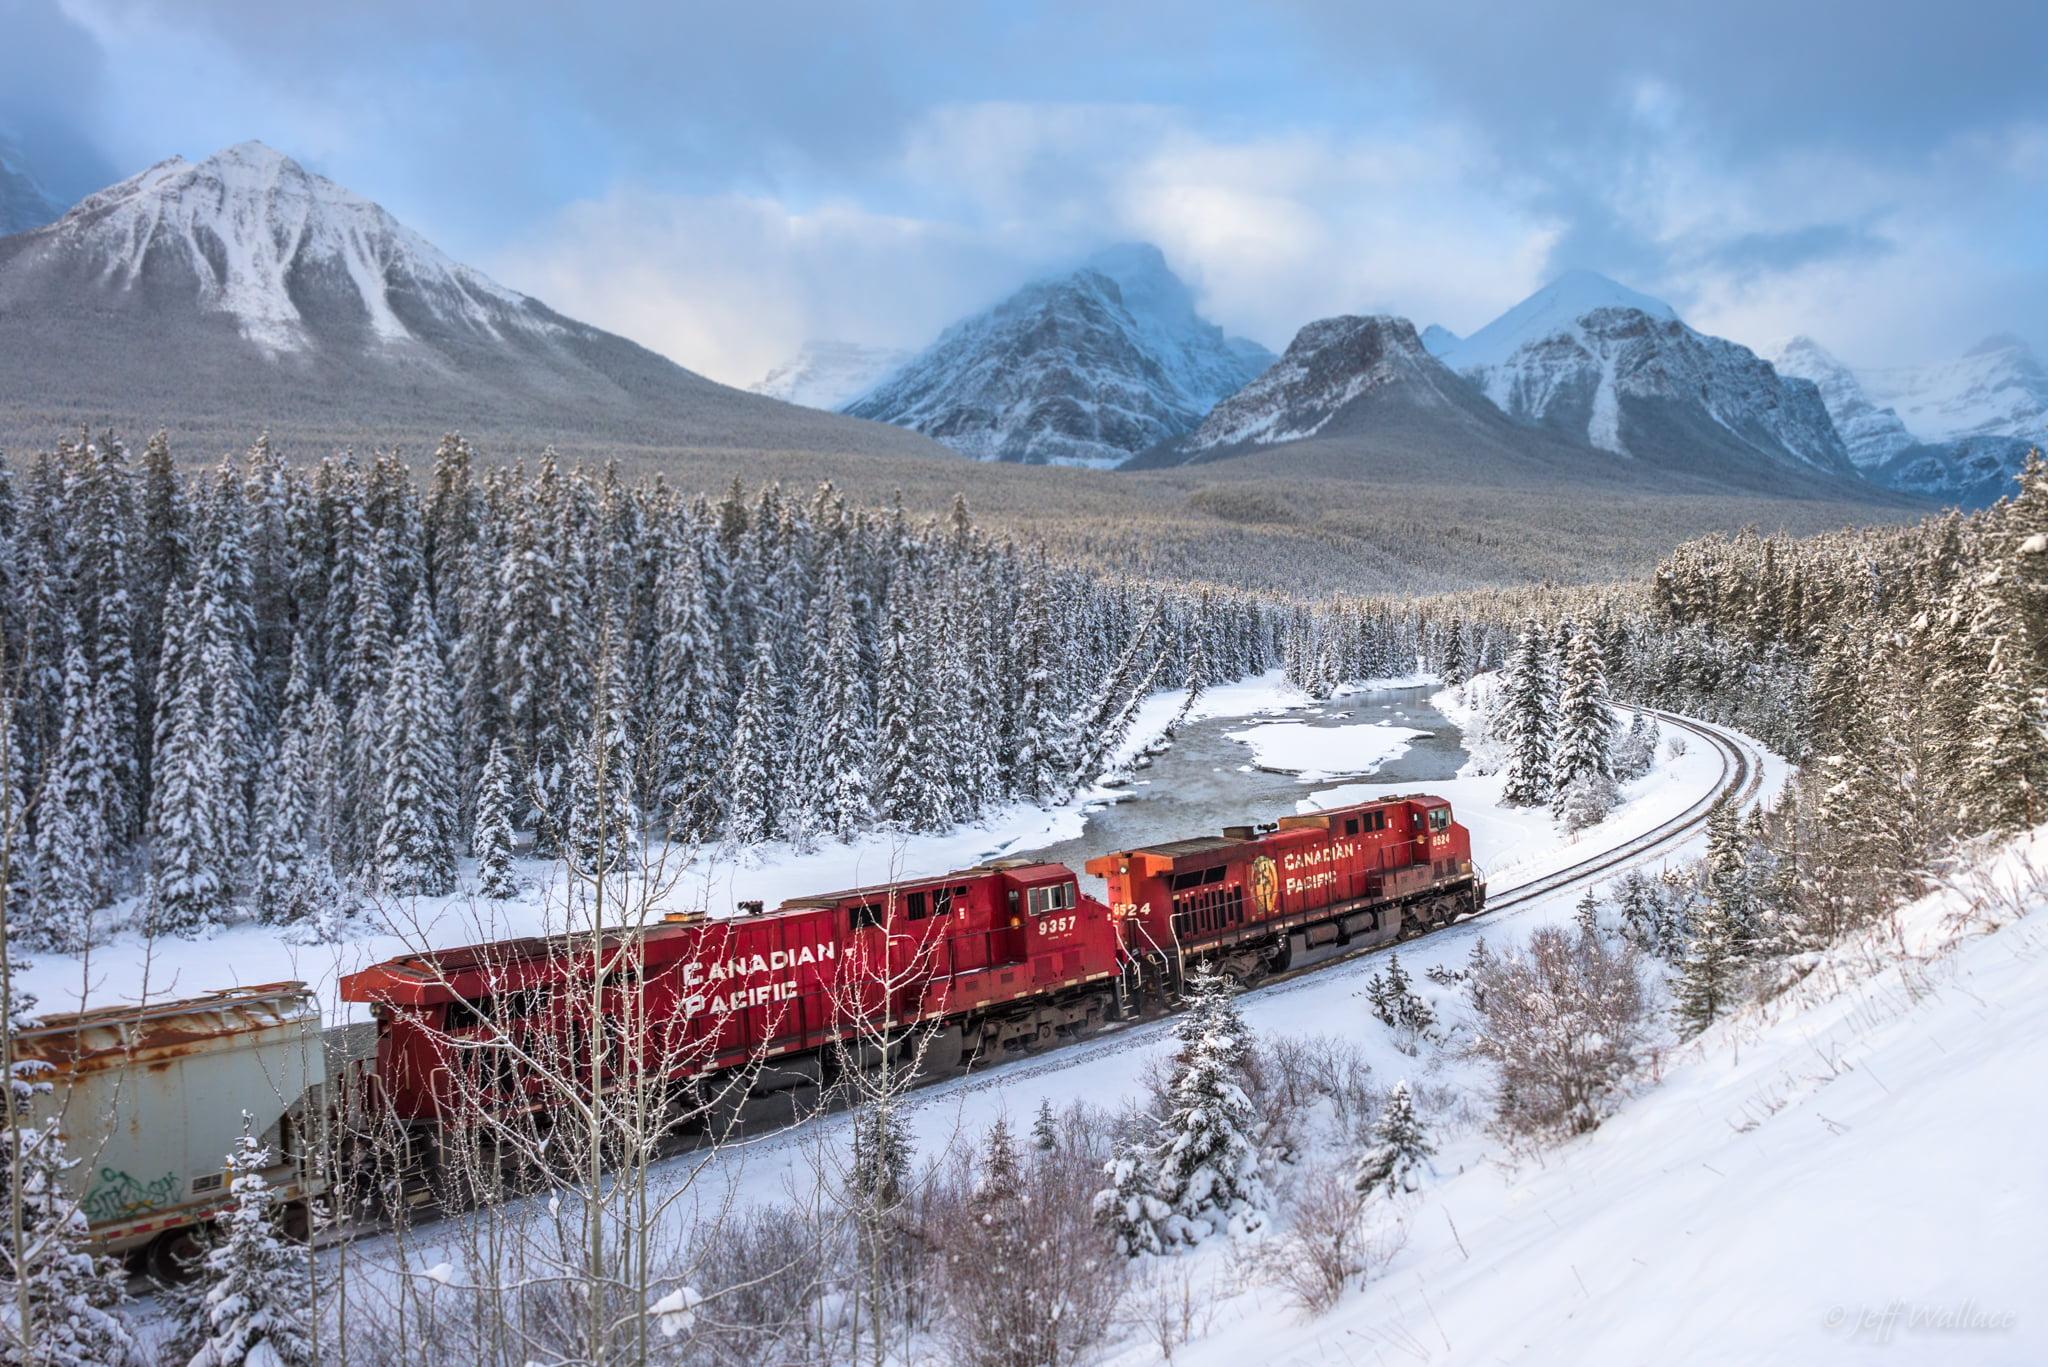 Photo of red train surrounded by trees during snow season